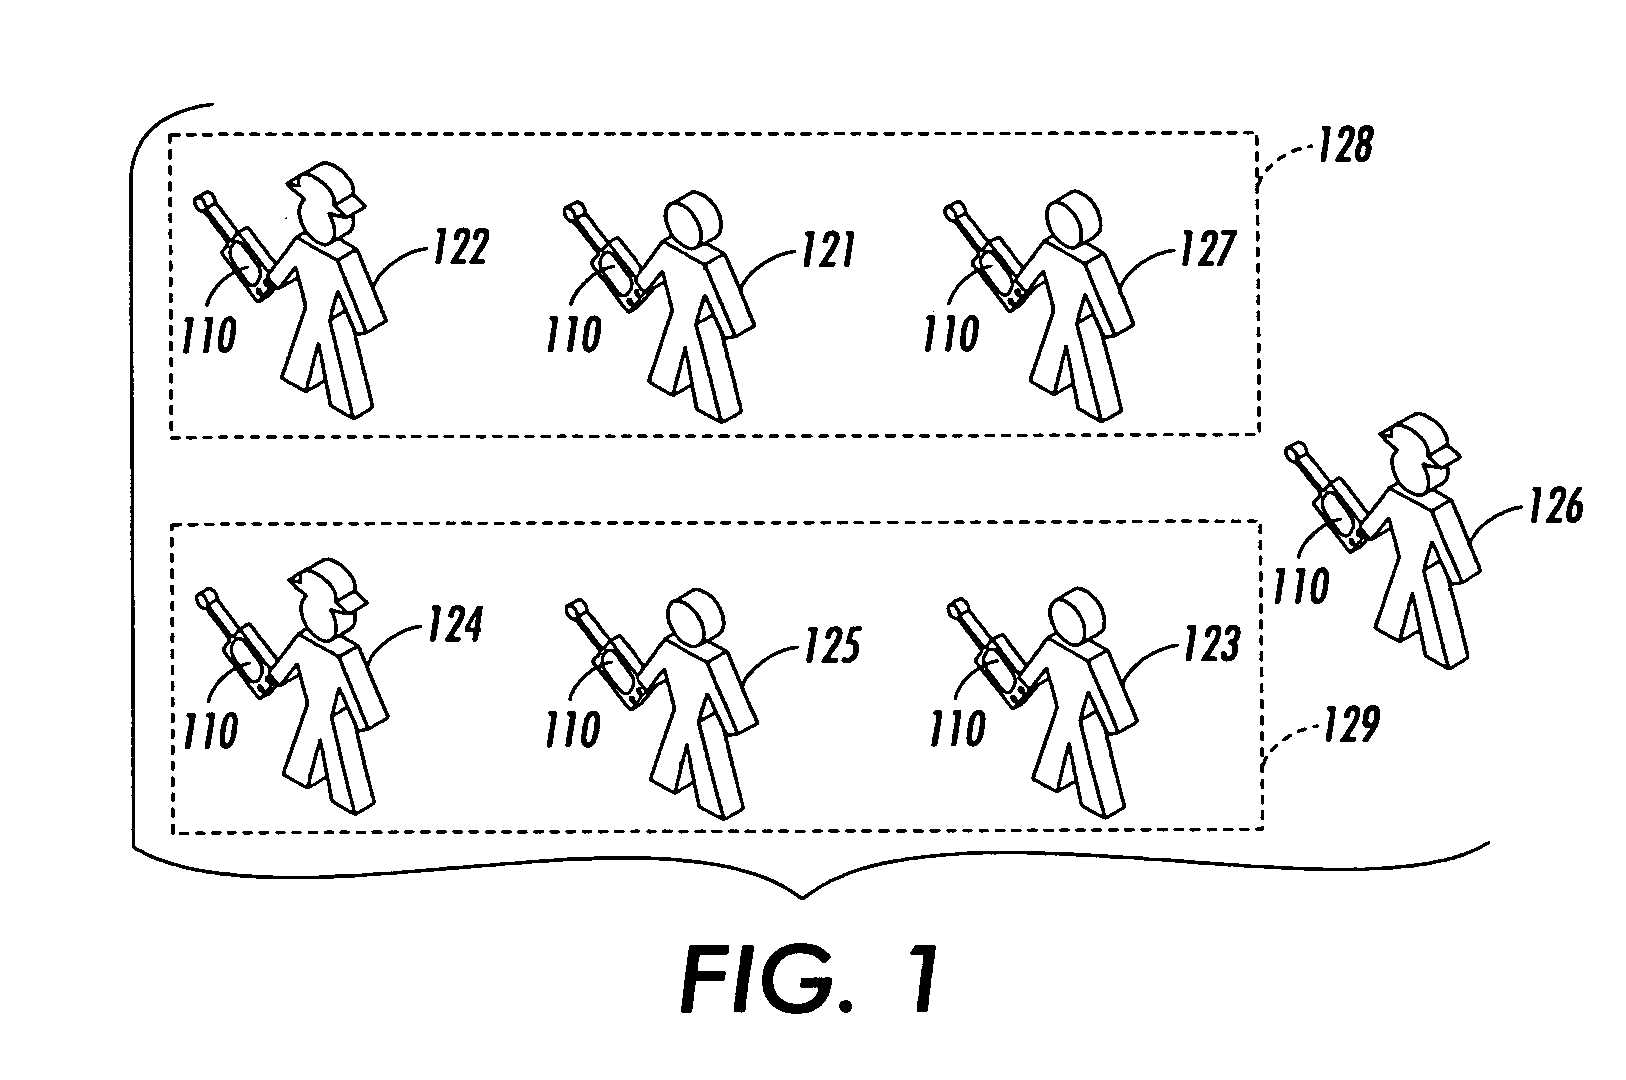 Systems and methods for authenticating communications in a network medium